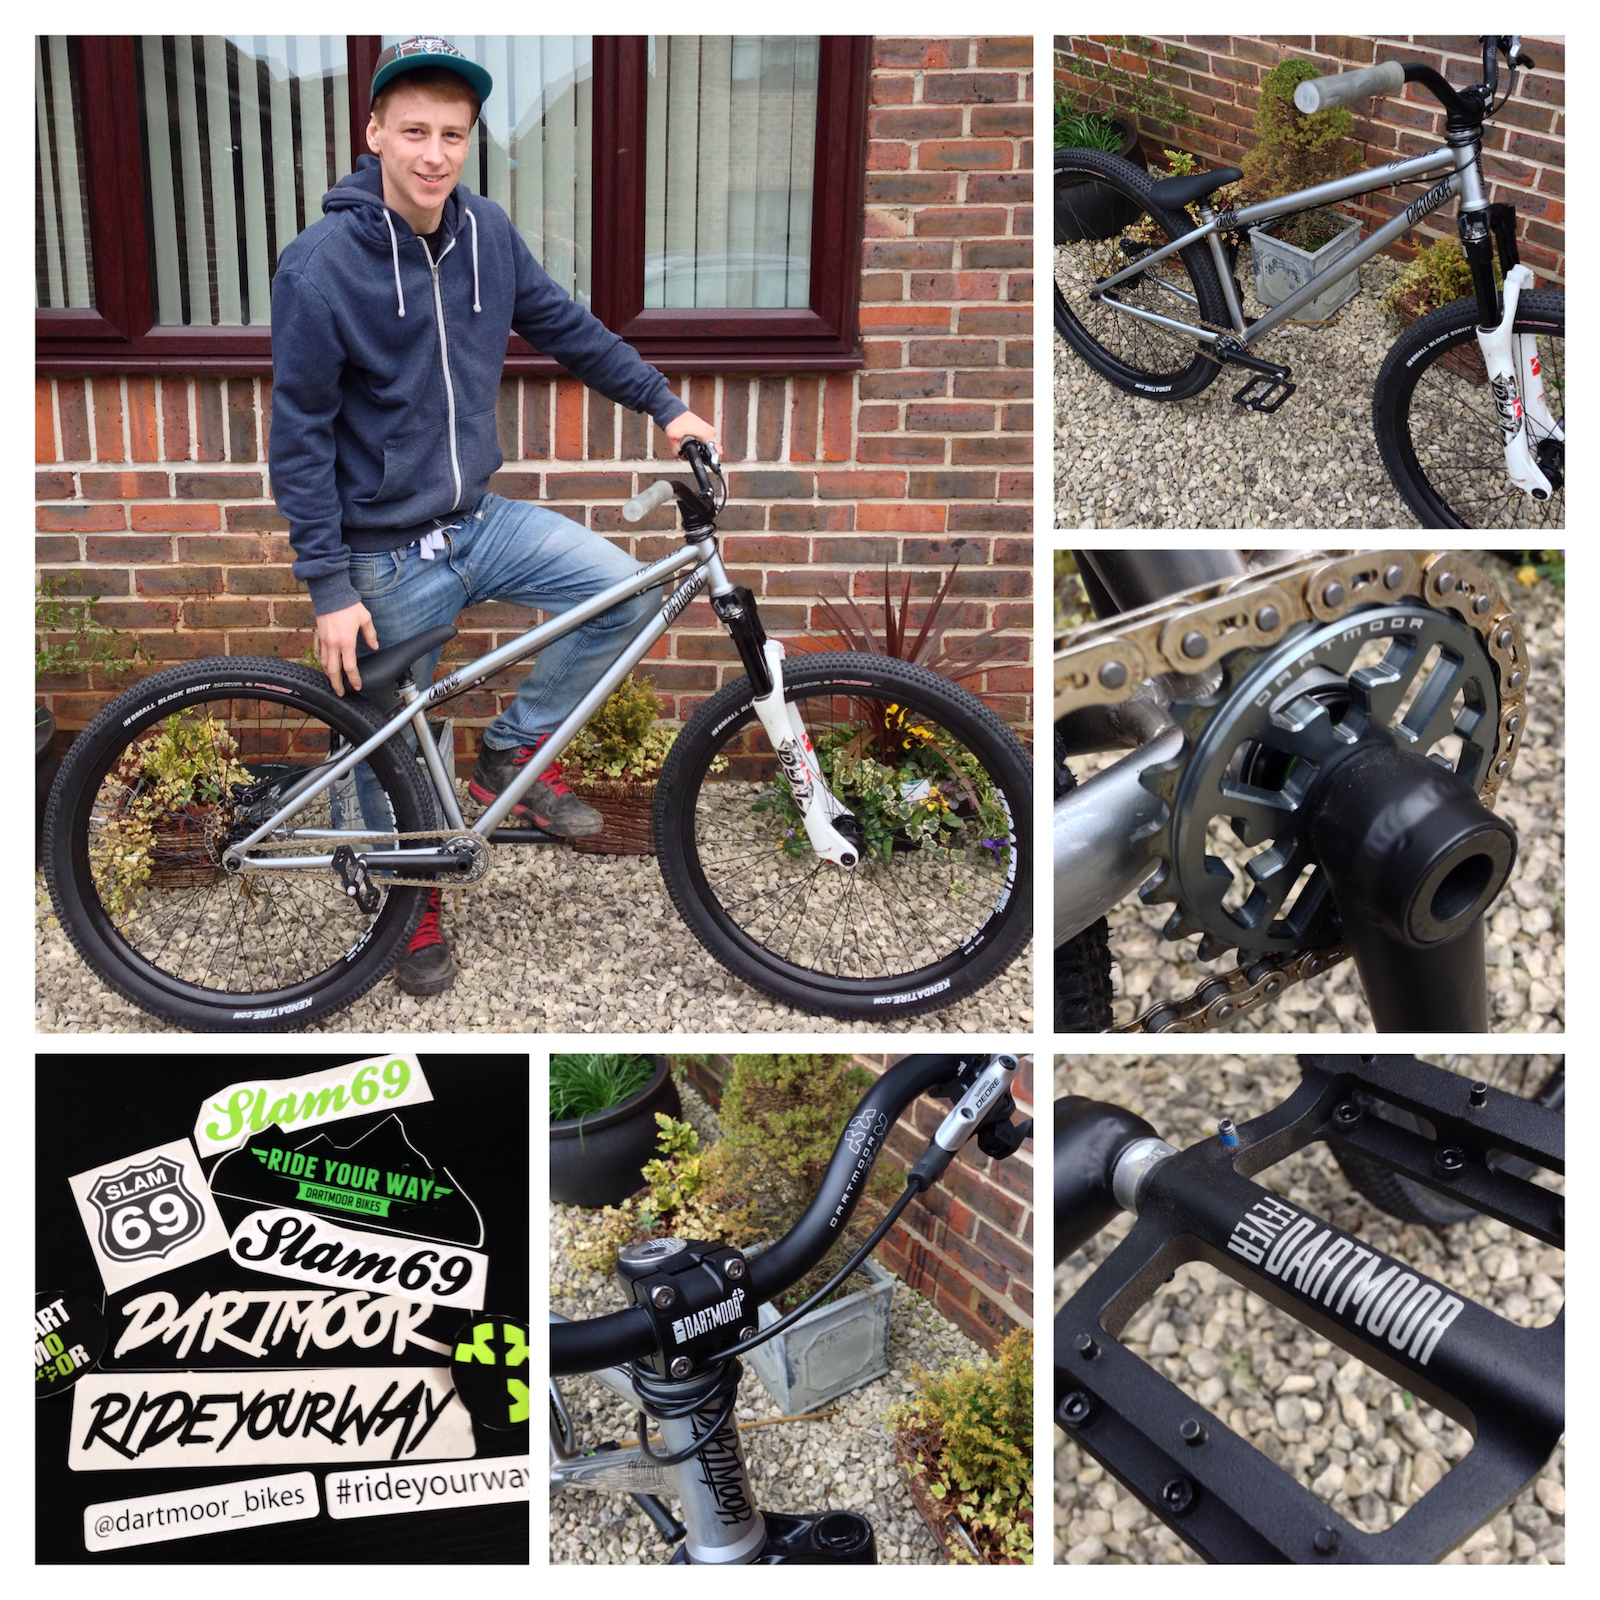 Stoked to be riding for Dartmoor bikes, X-fusion shox and Slam 69 for 2014!! Let the good times begin!